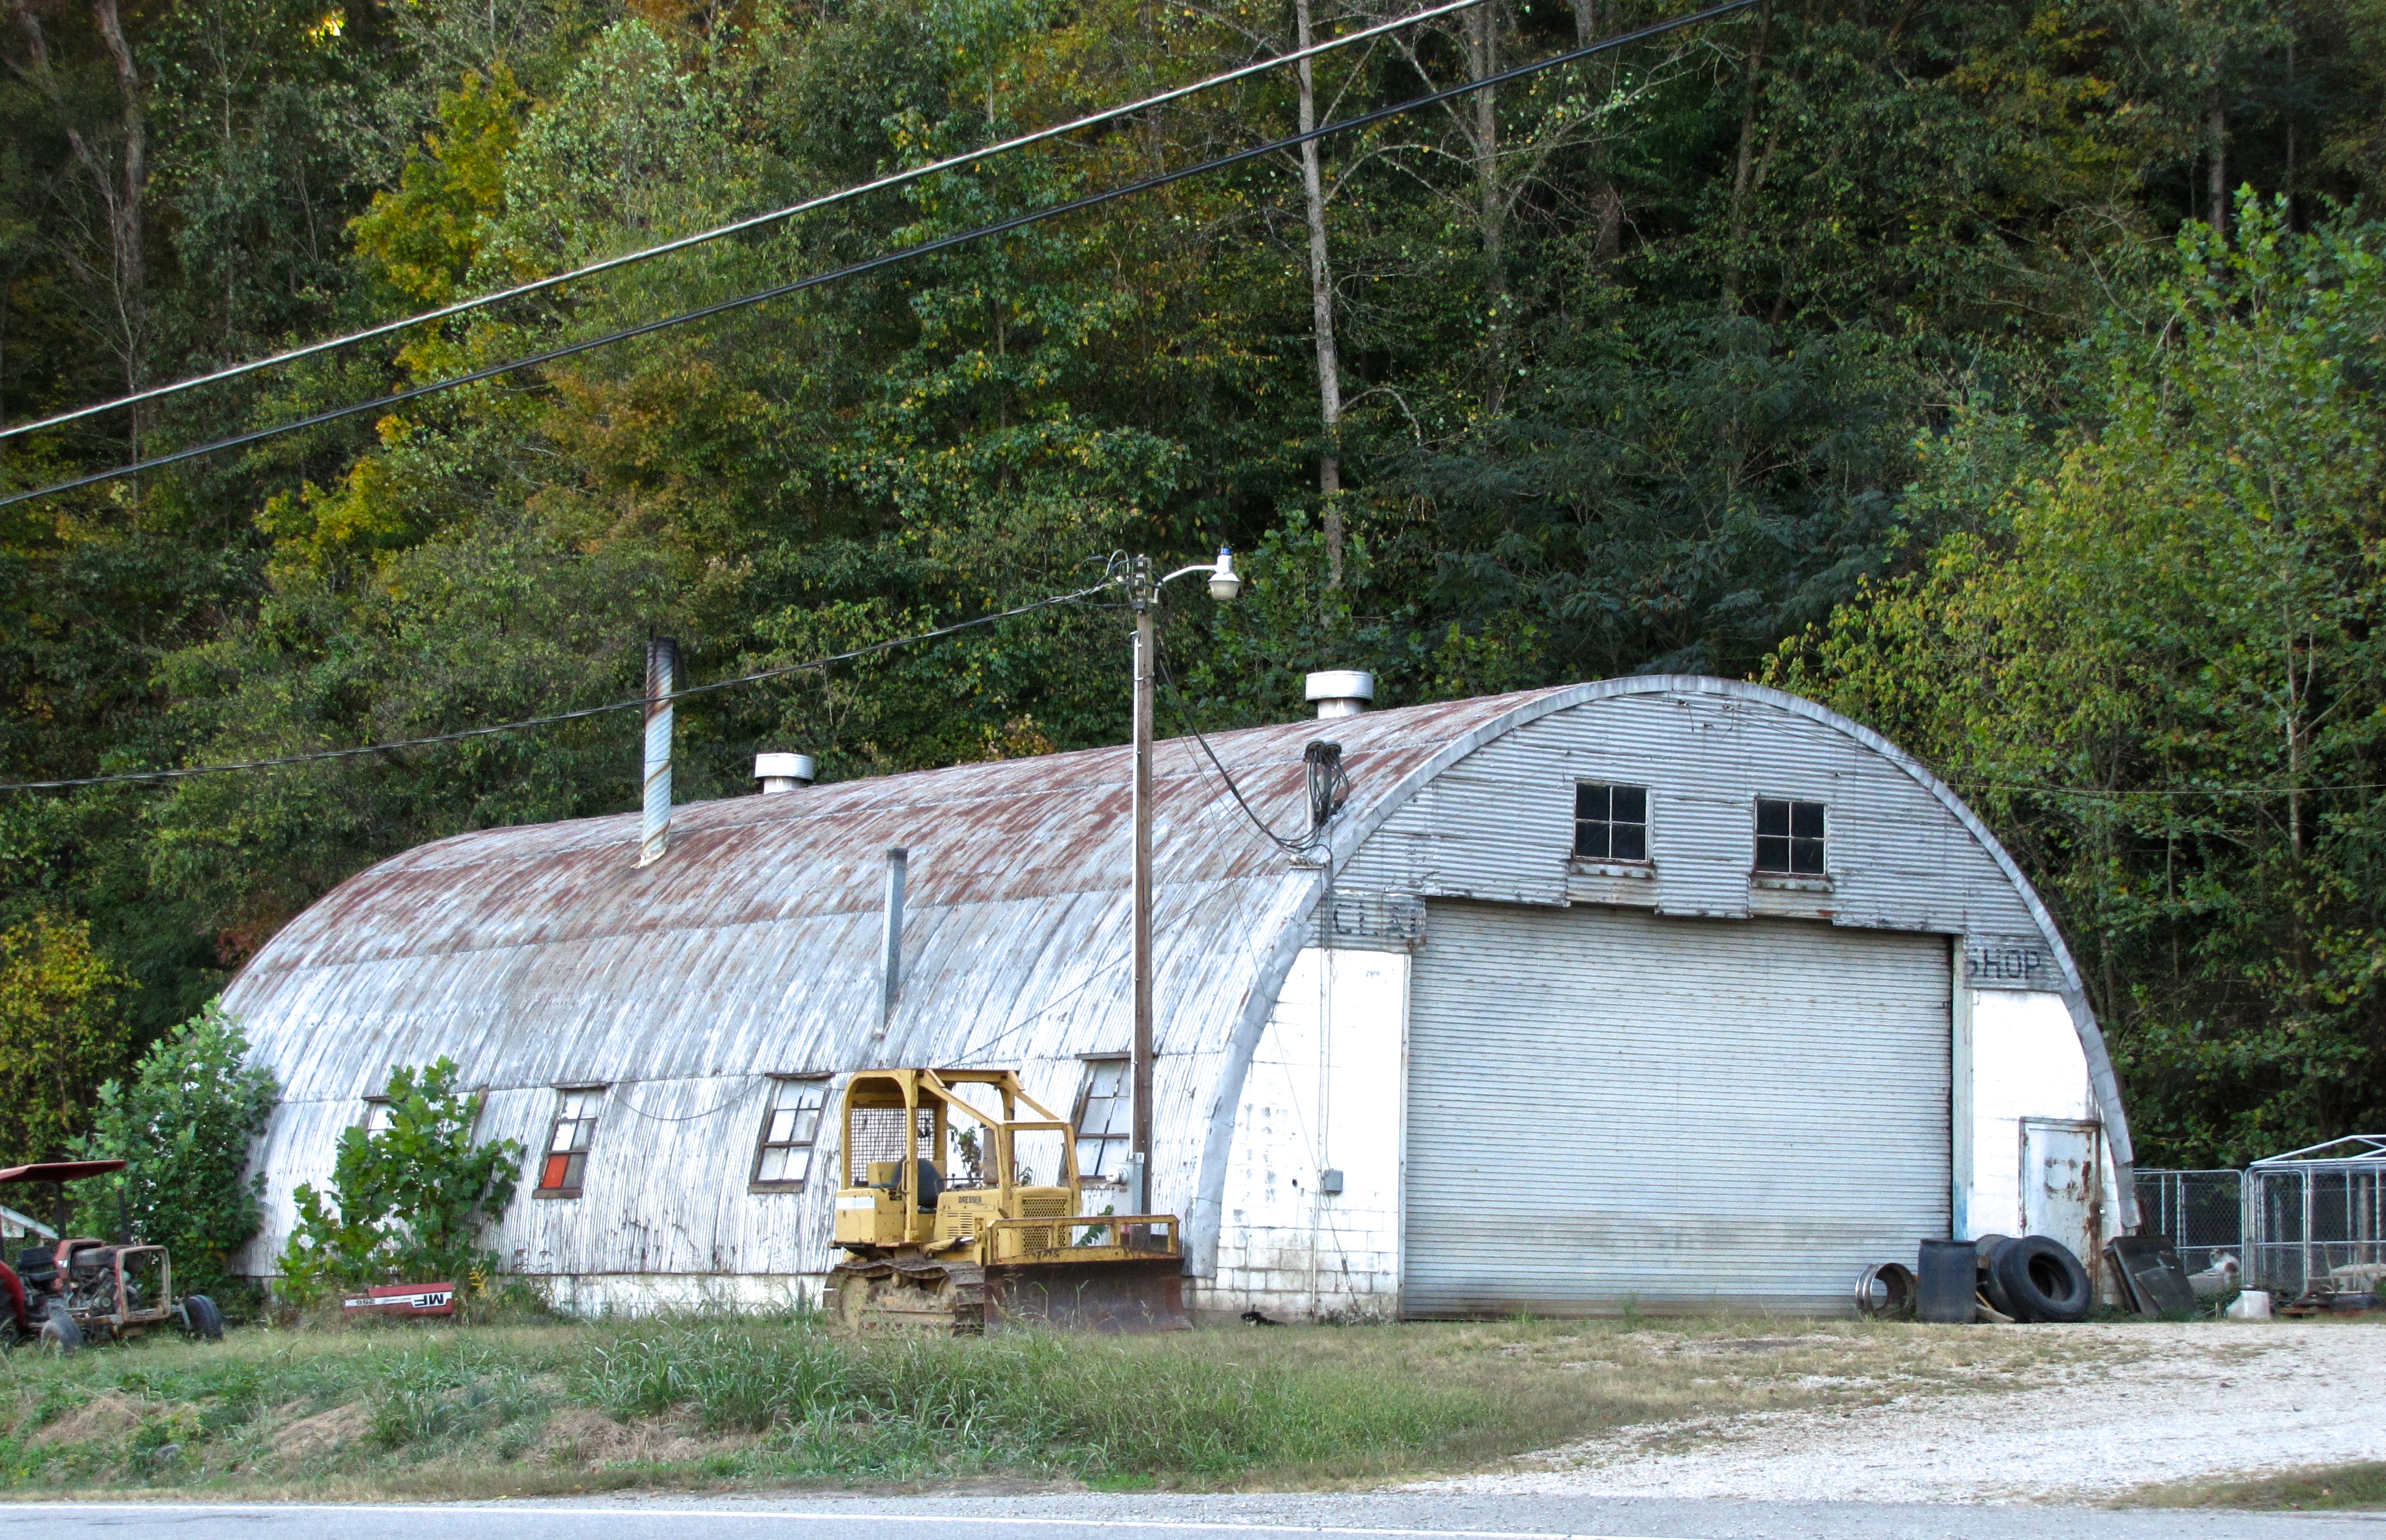 quonset hut in Privacy Policy, RI